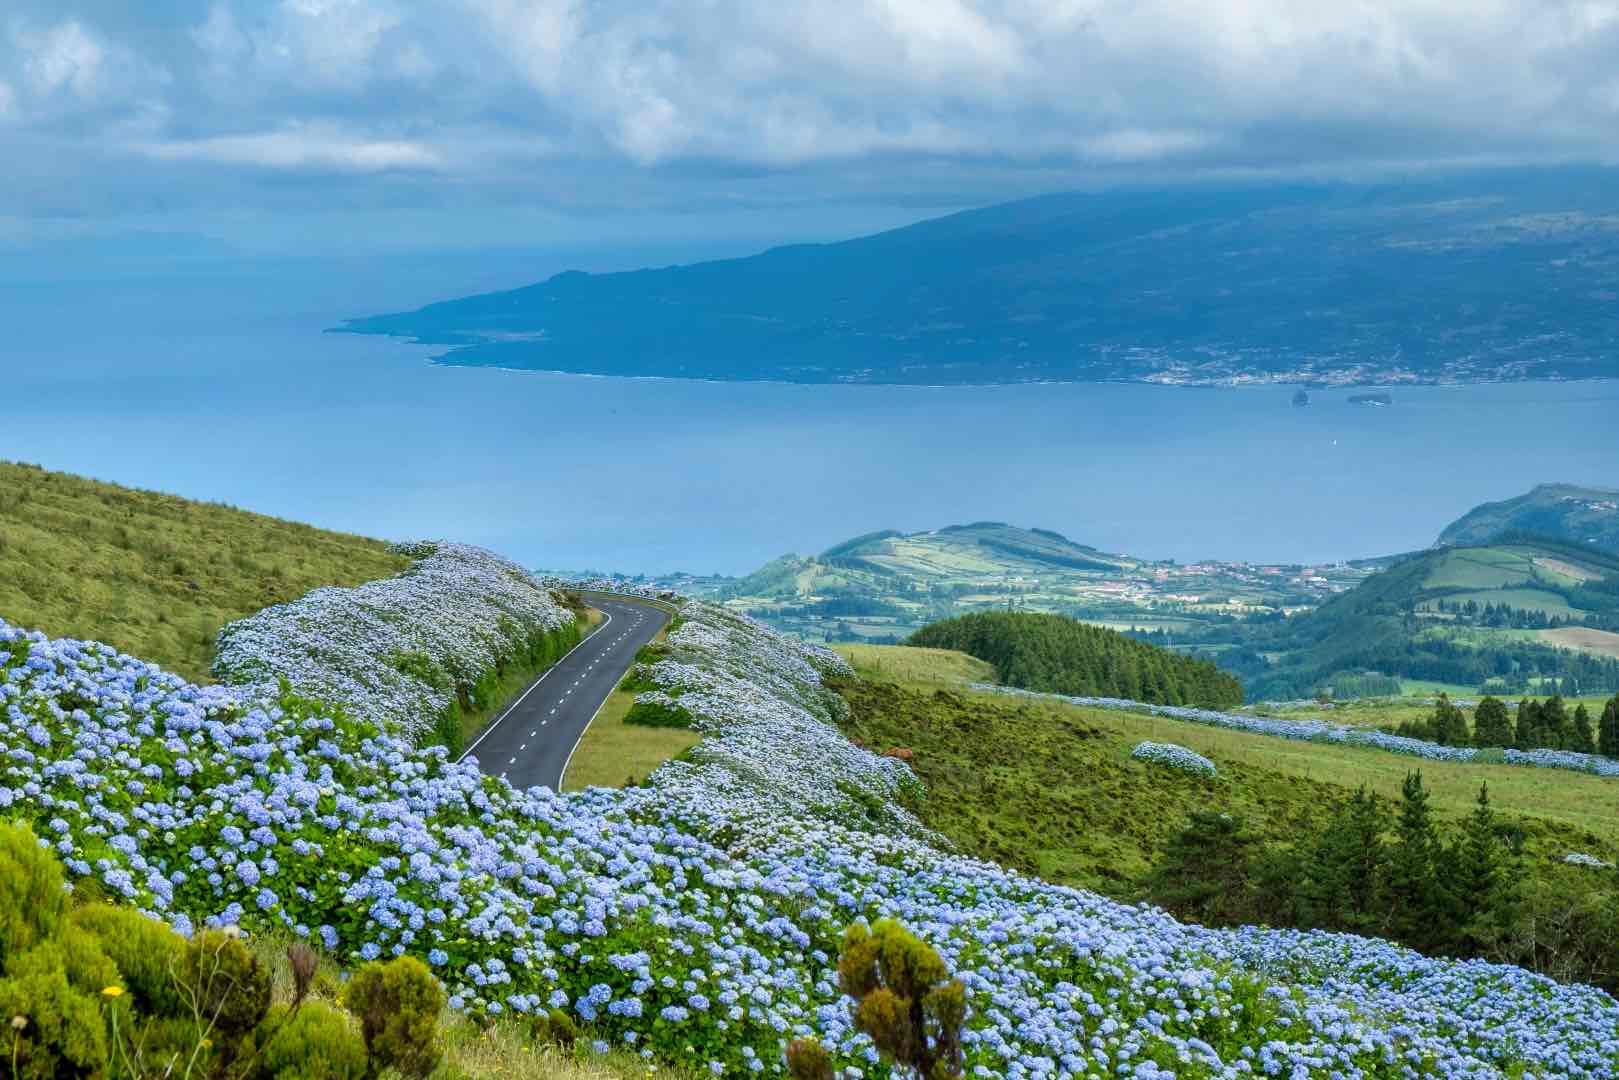 The most beautiful road with flowers with an ocean view on Faial Island, Azores.